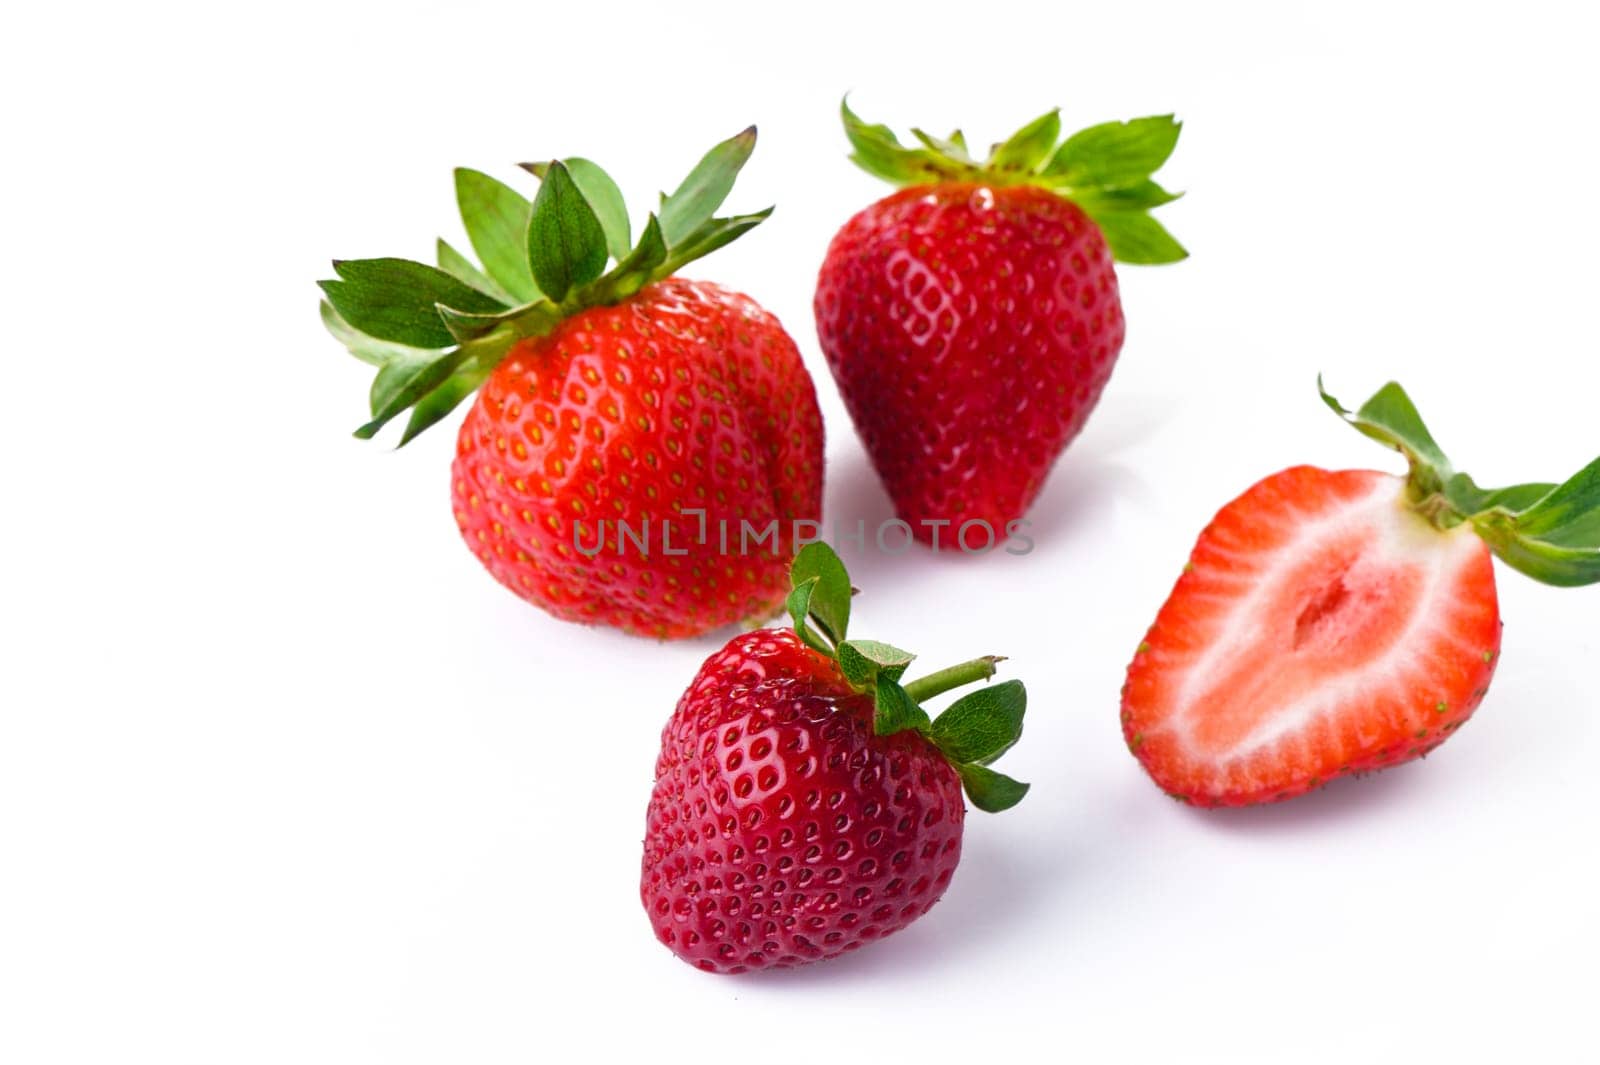 Strawberries isolated on white background by Mixa74